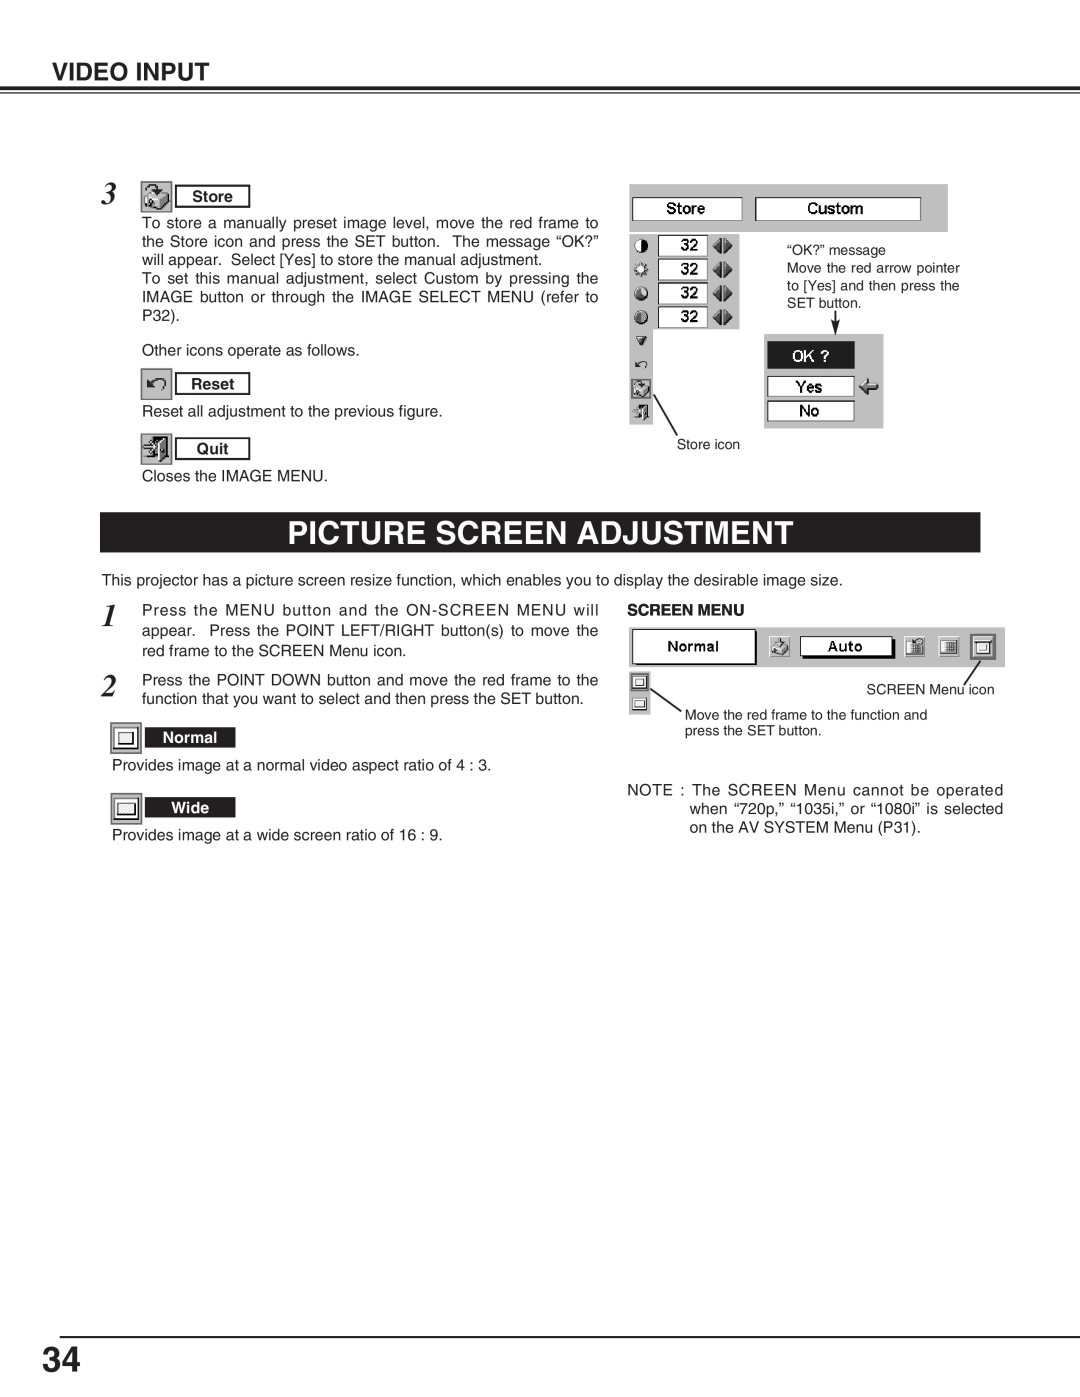 Canon LV-X2 owner manual Picture Screen Adjustment, Video Input, Store, Reset, Quit, Screen Menu 